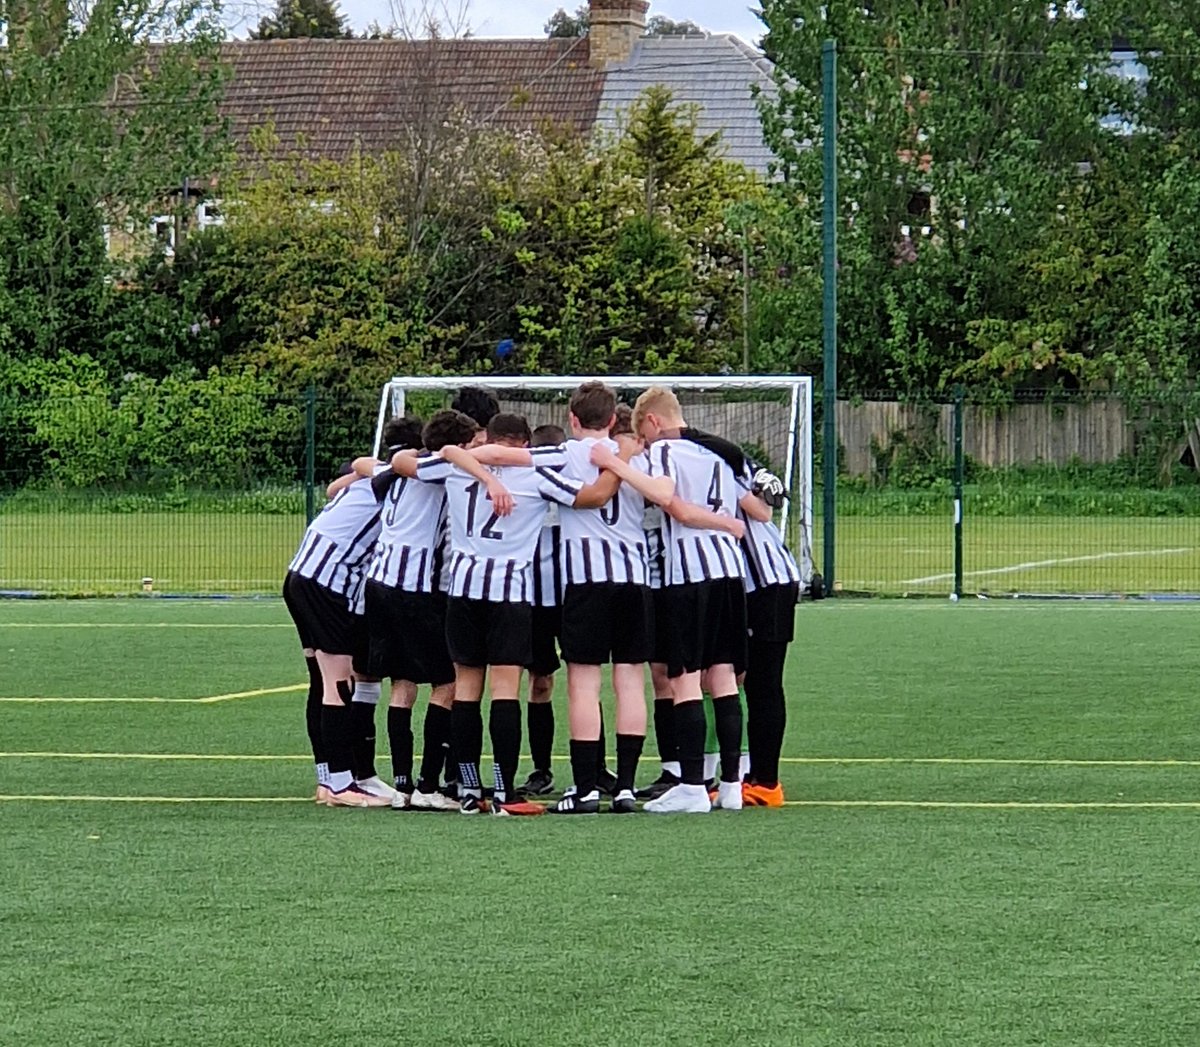 LEAGUE ACTION 

🗓 Sunday, 28 April 2024

🏆U14 EJA Black League 

🏟 Metropolitan Bushey

🆚️ Harefield United Youth 

⏰️ 11:30 KO

📍 WD23 2TR

It's our last game of the season. The lads are aiming to secure runners up spot.

@EJALeague
@ColneyHeathFC
#Magpies #UTH
⚫️⚪️